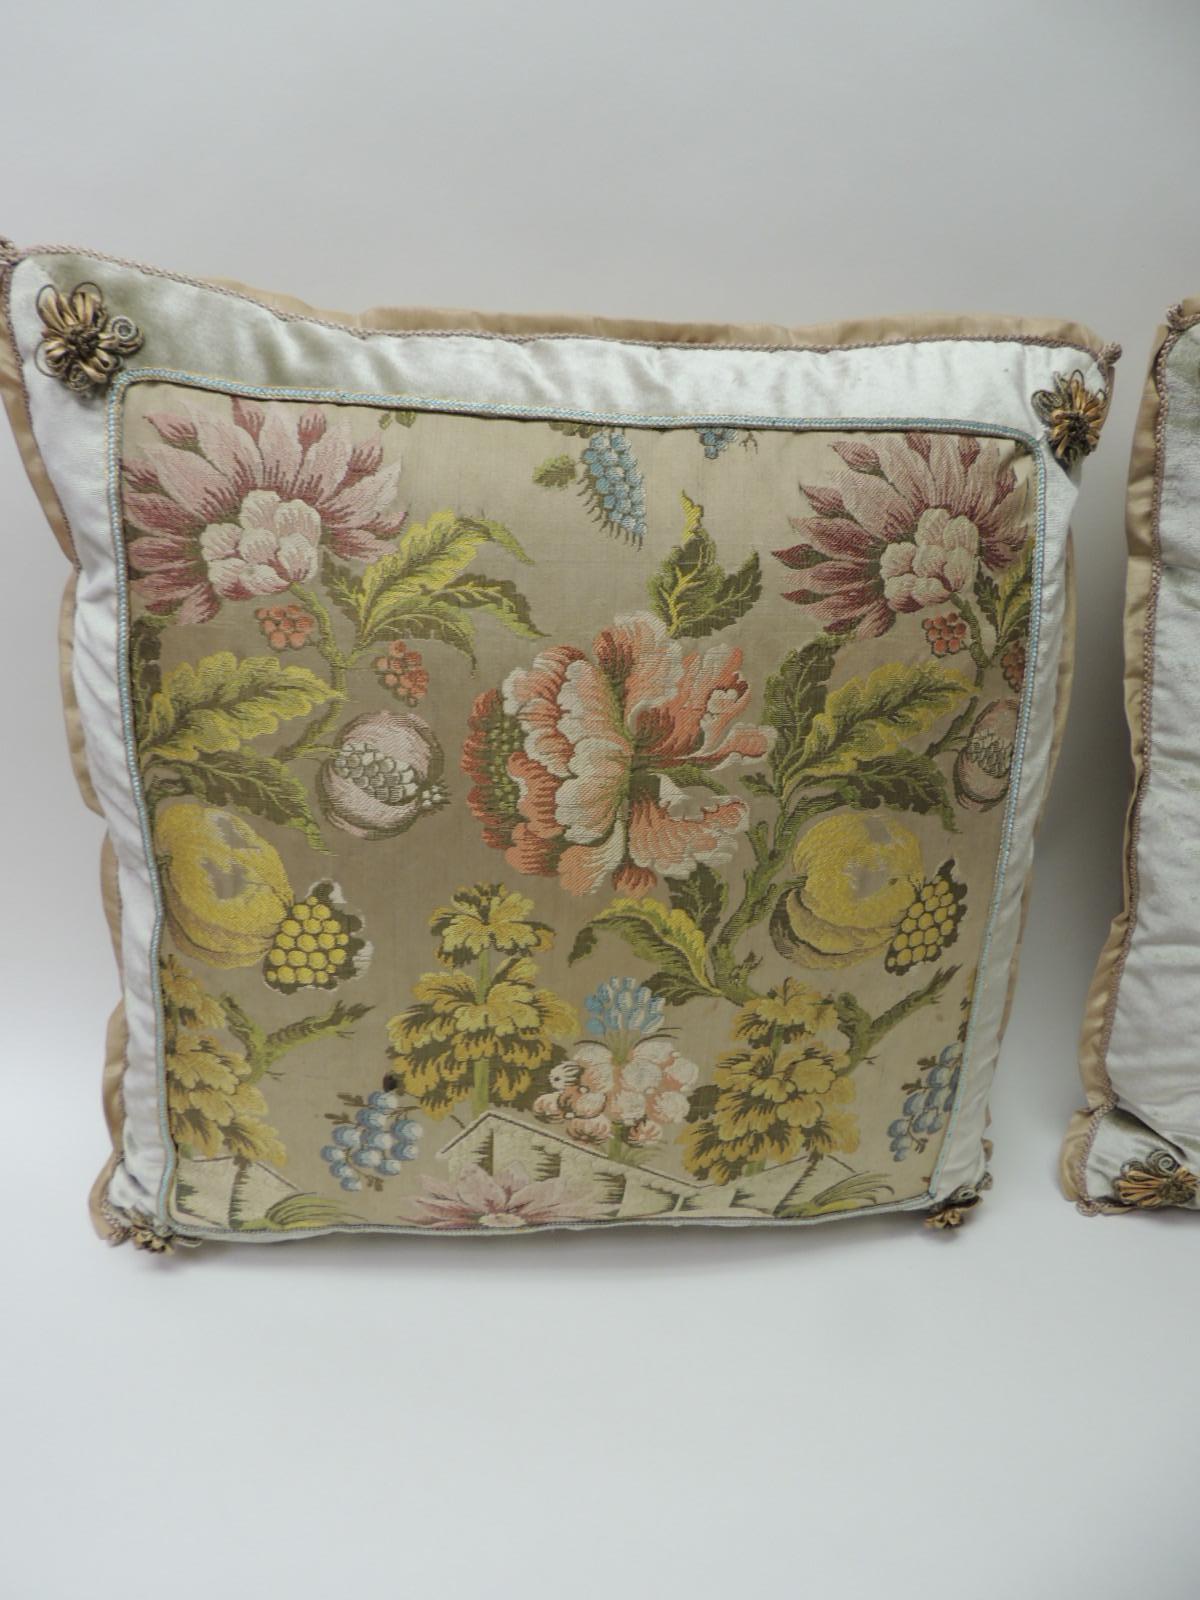 Pair of 19th century French brocade floral decorative pillows
Pair of yellow and green floral square antique textile decorative pillows. Colorful French woven silk brocade pillows, framed with silk velvet and embellished with a small silk blue and